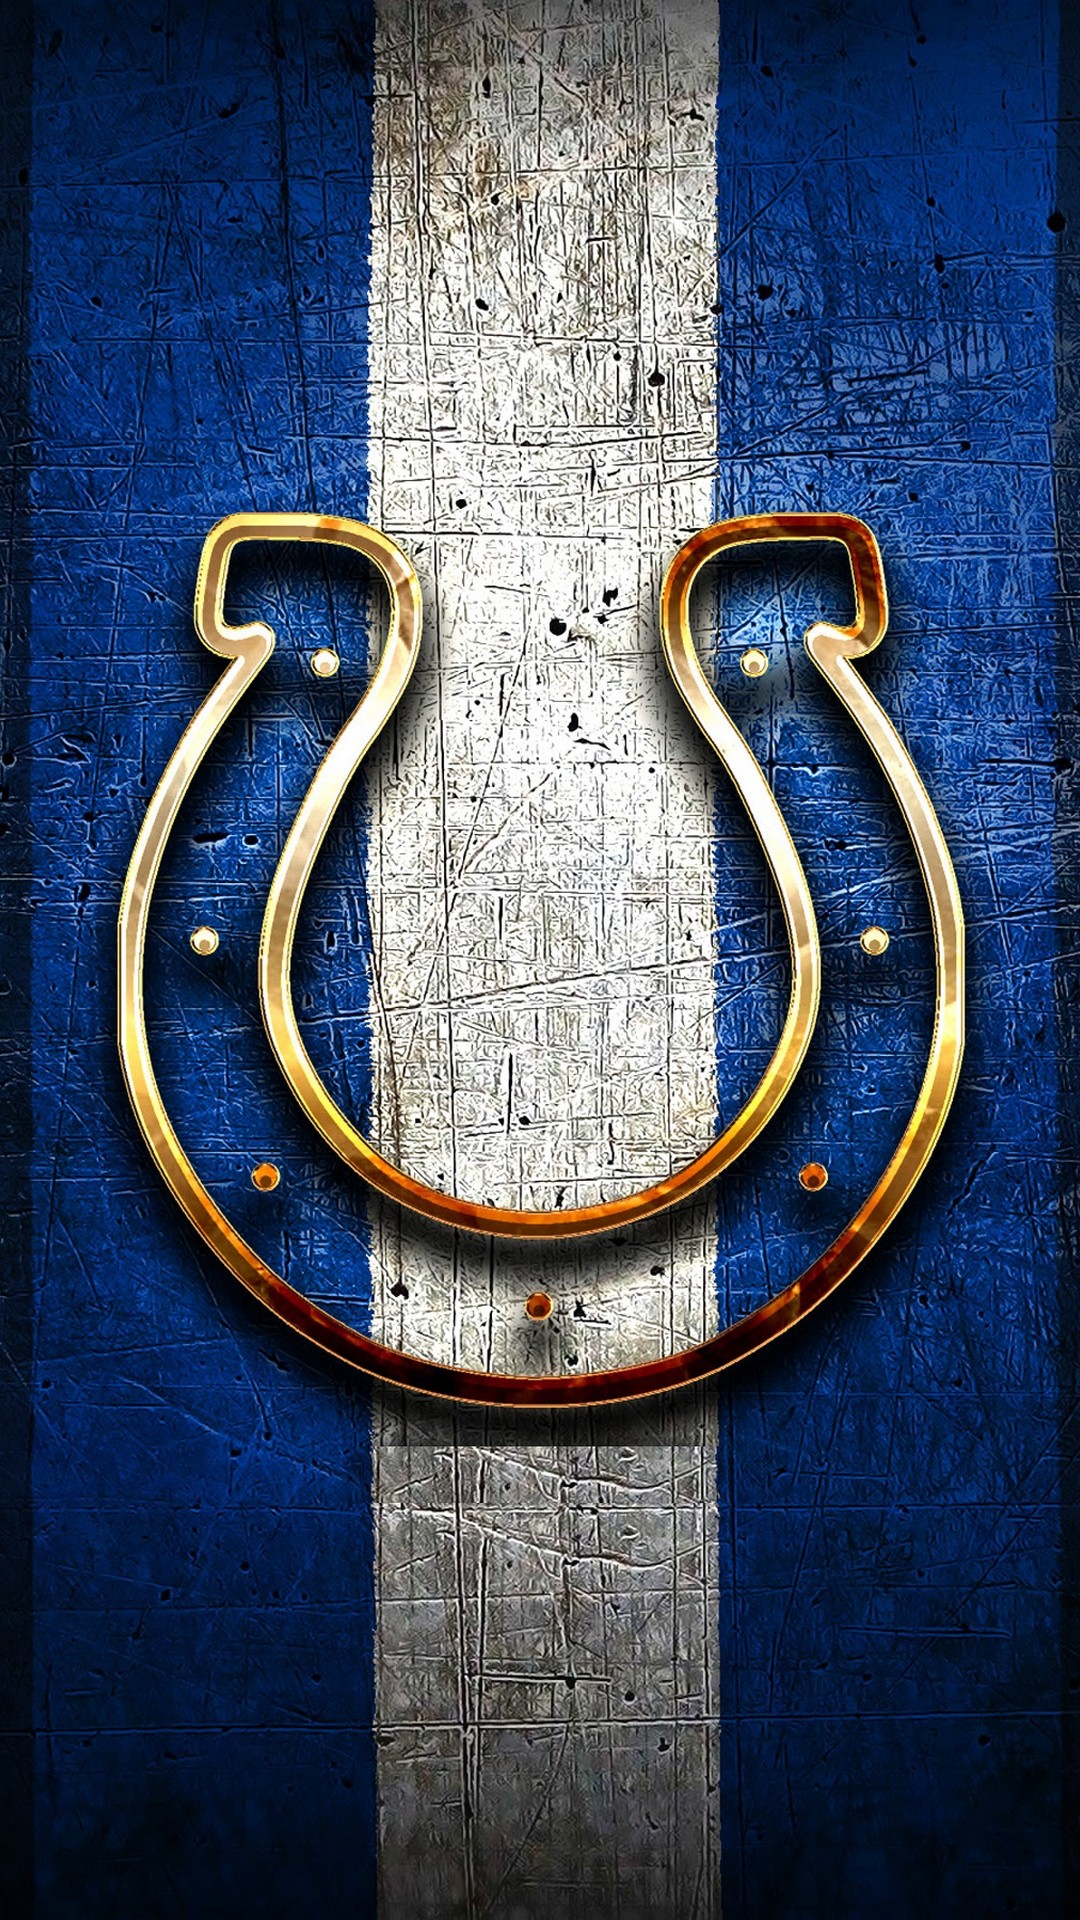 Colts  Indianapolis Colts NFL Football HD phone wallpaper  Pxfuel